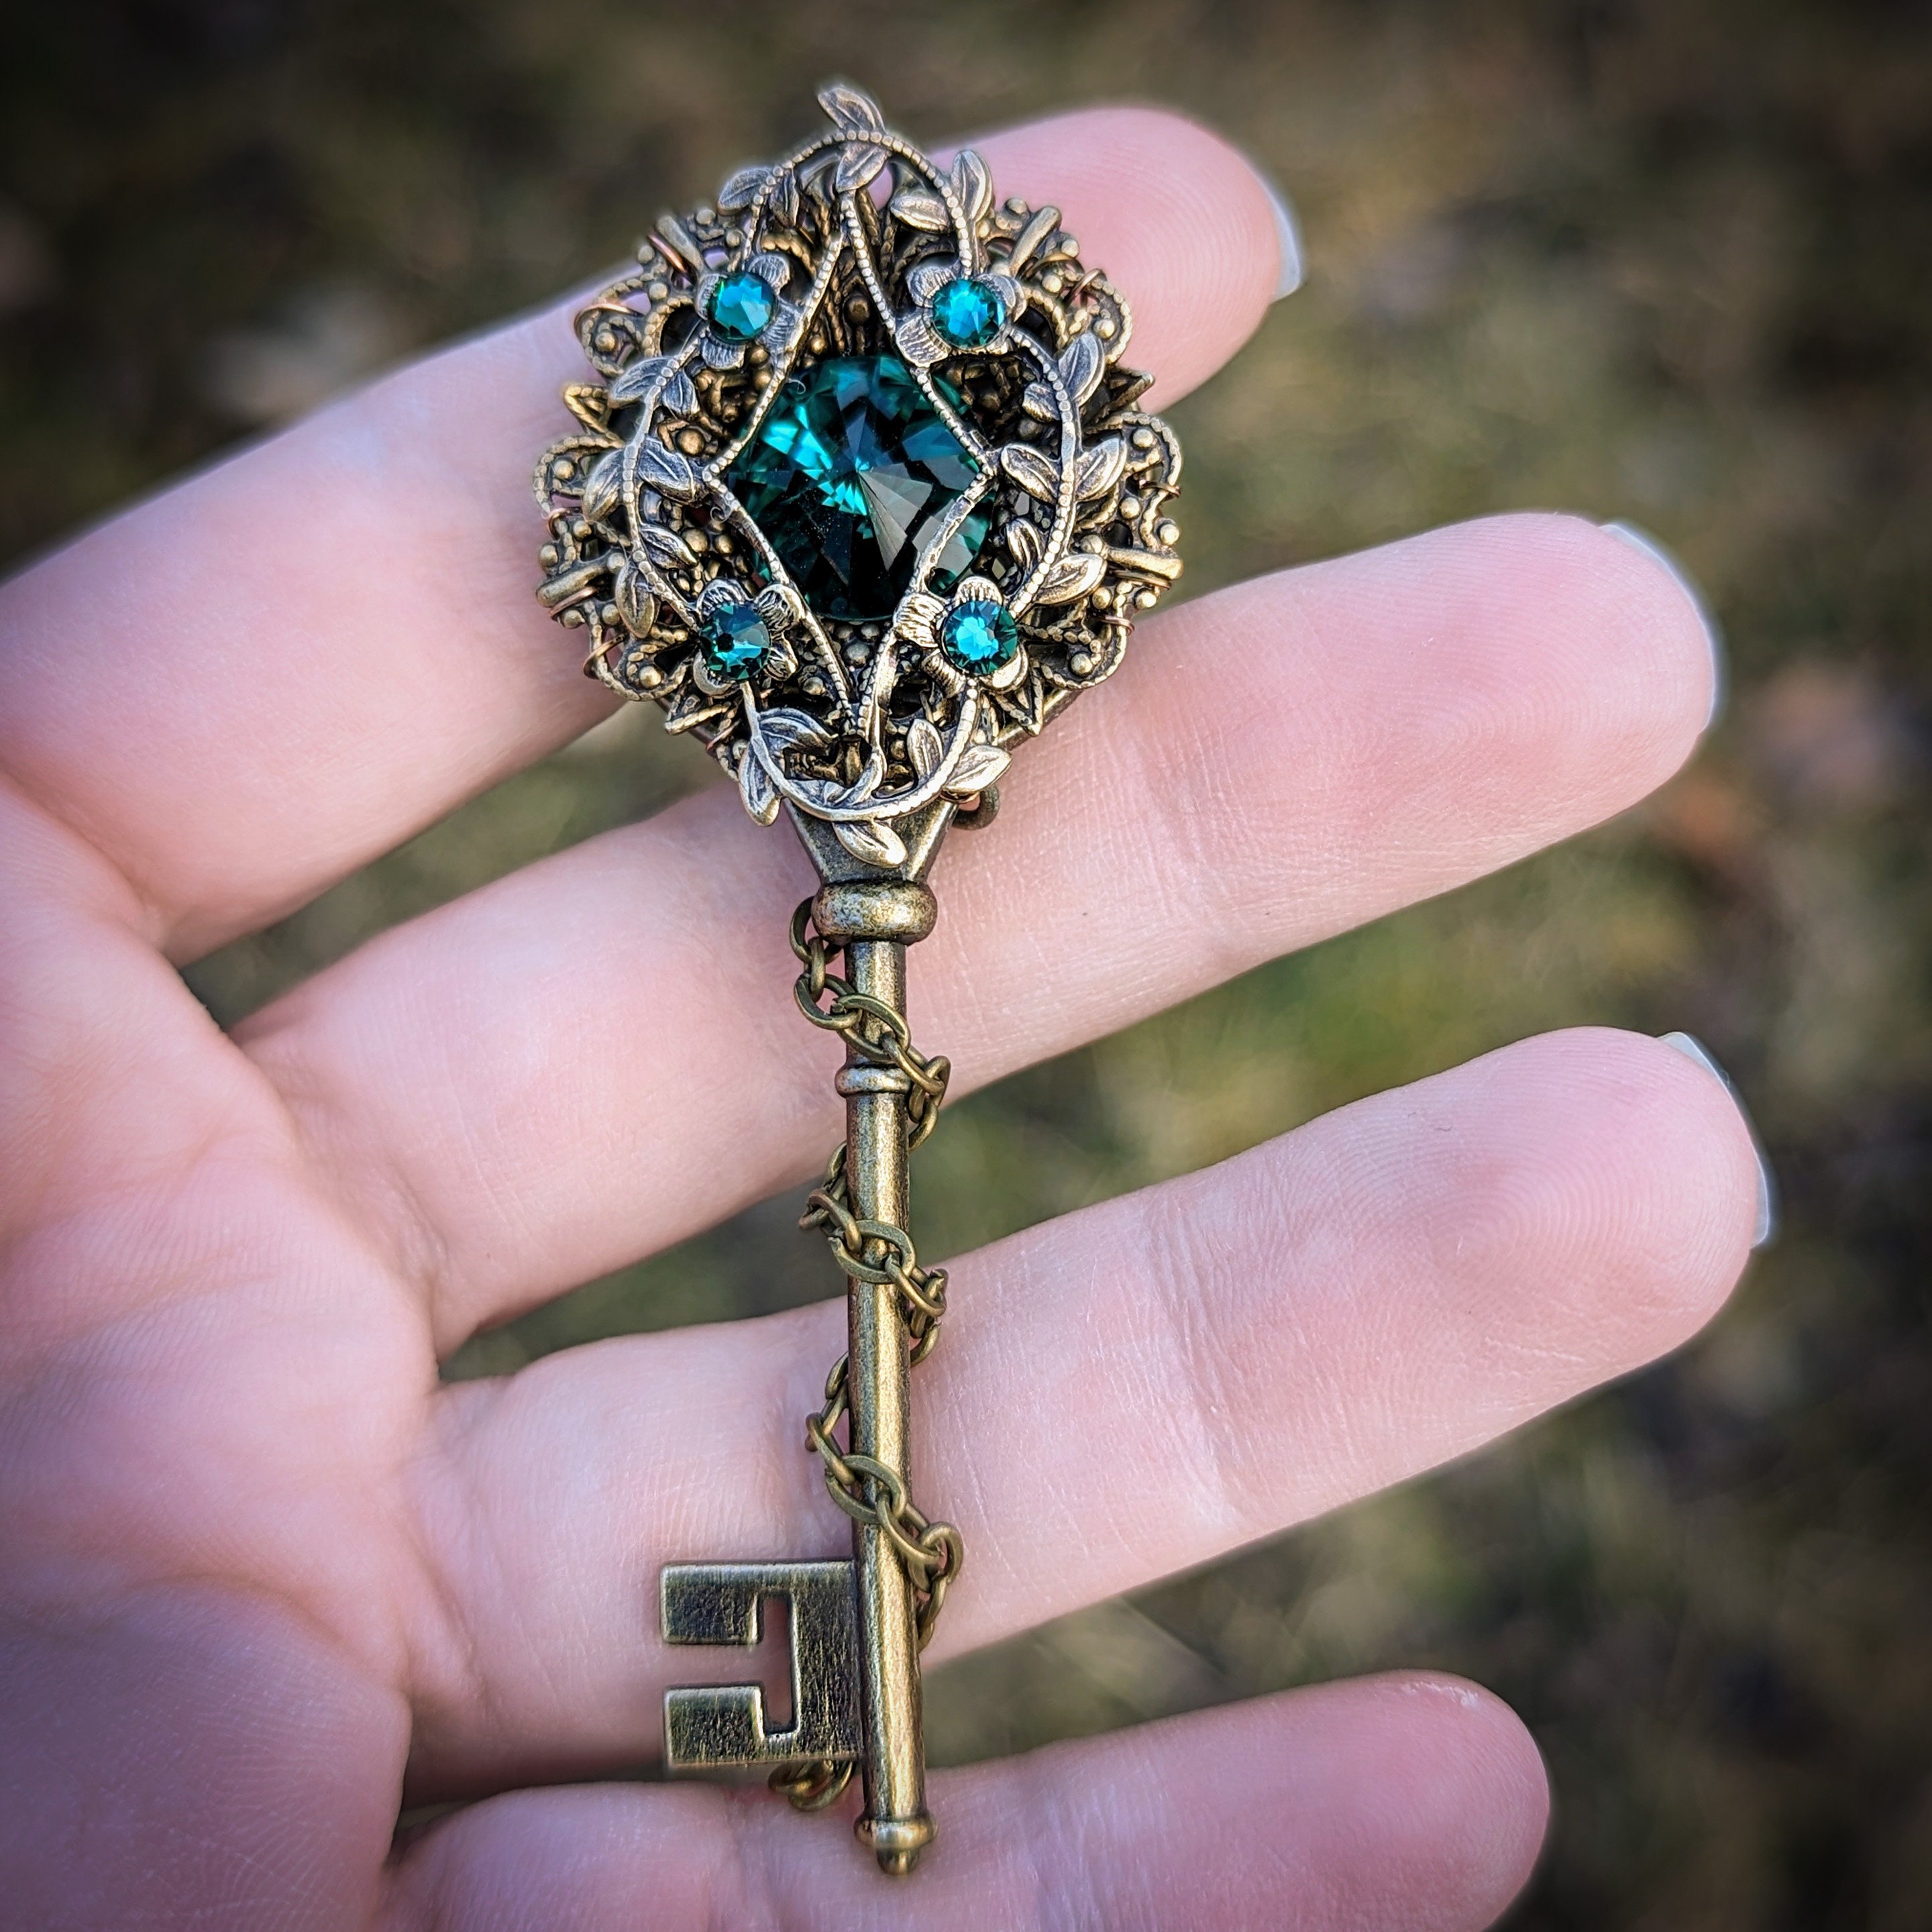 Brass Key to Your Heart Fantasy Necklace with Fairy and Swarovski Crystals, Fantasy Jewelry, Fairy Jewelry, Key Jewelry, Keyblade